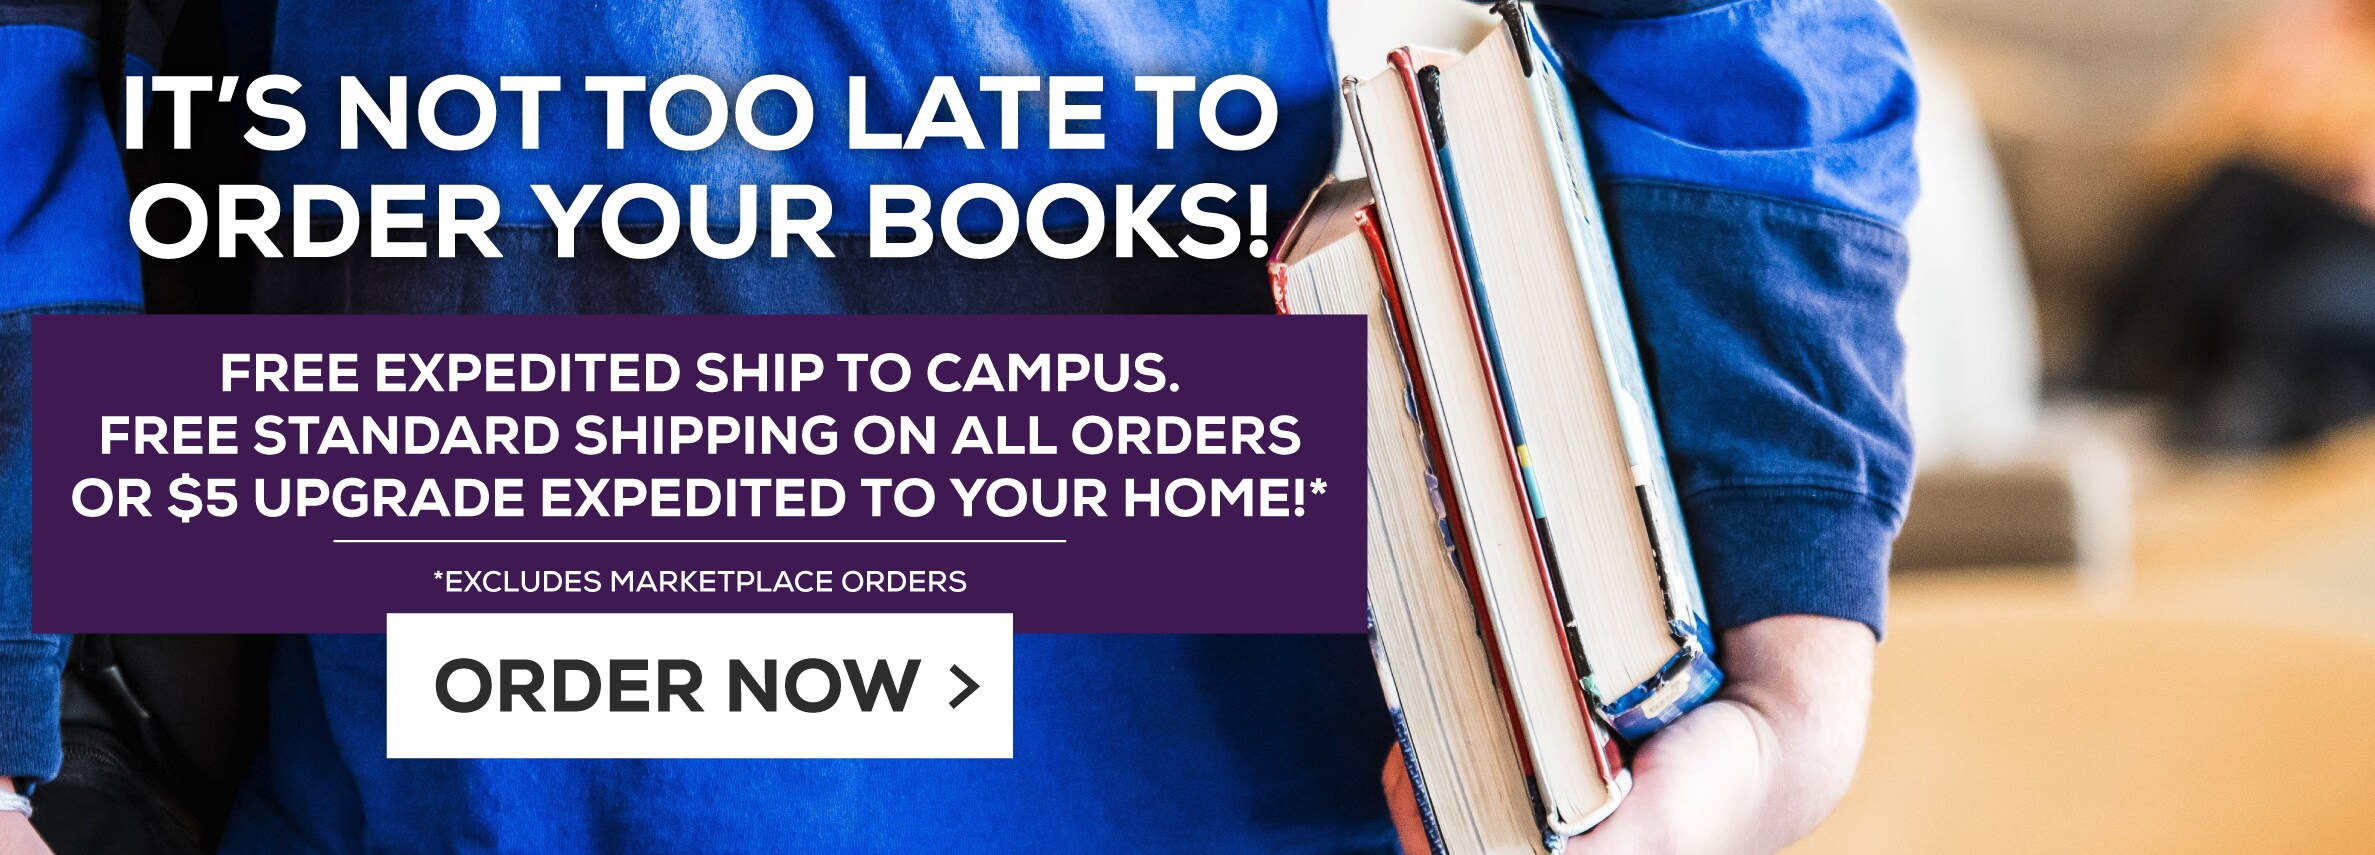 It's not too late to order your books! Free expedited ship to campus; free standard shipping on all orders to home; $5 upgrade expedited to your home* Excludes marketplace purchases.